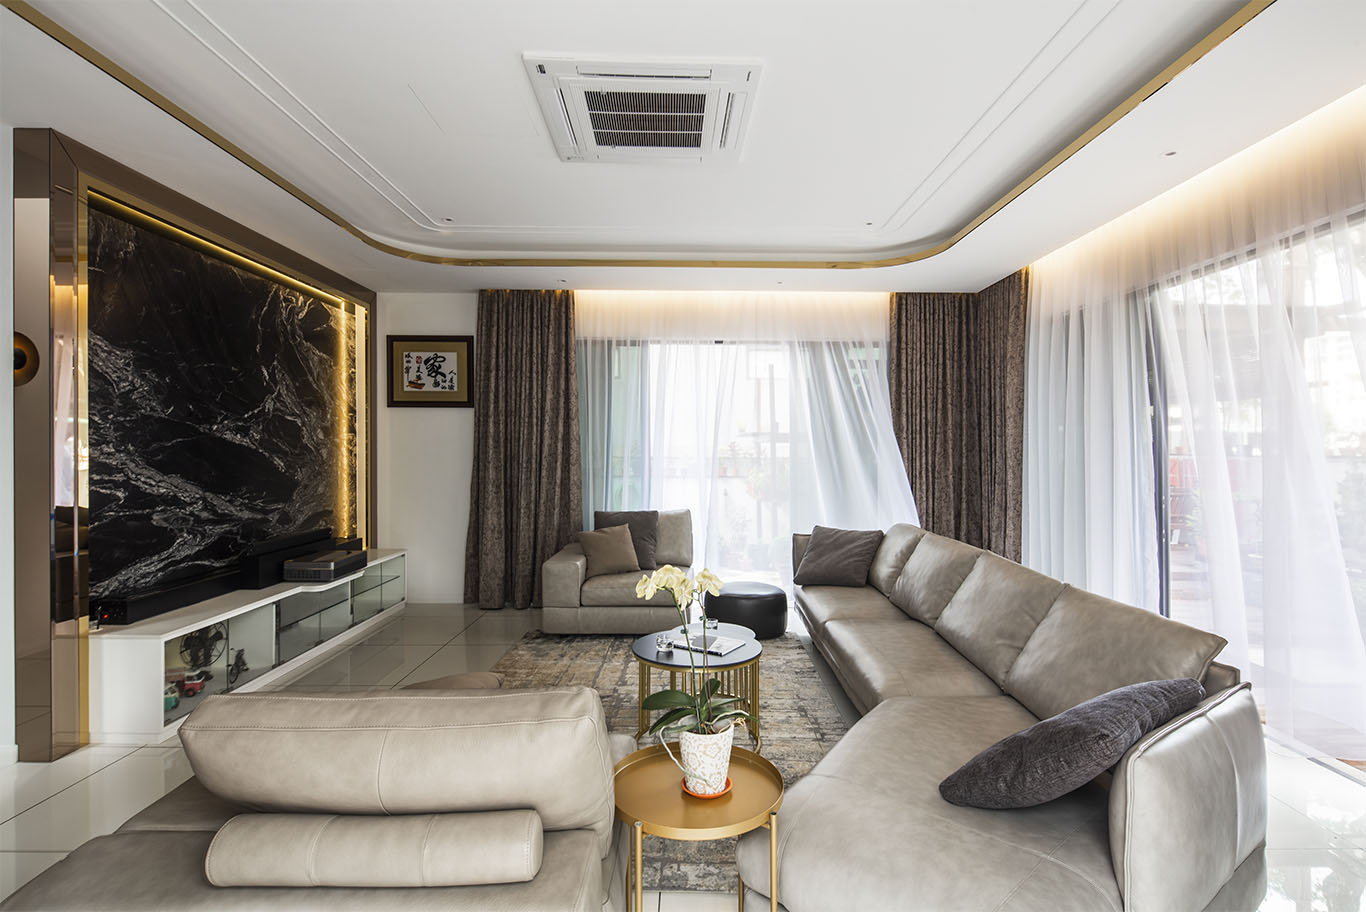 MIEUX La Famillie De Lee luxury living room with black marble wall and ceiling aircon 3 mieux interior design